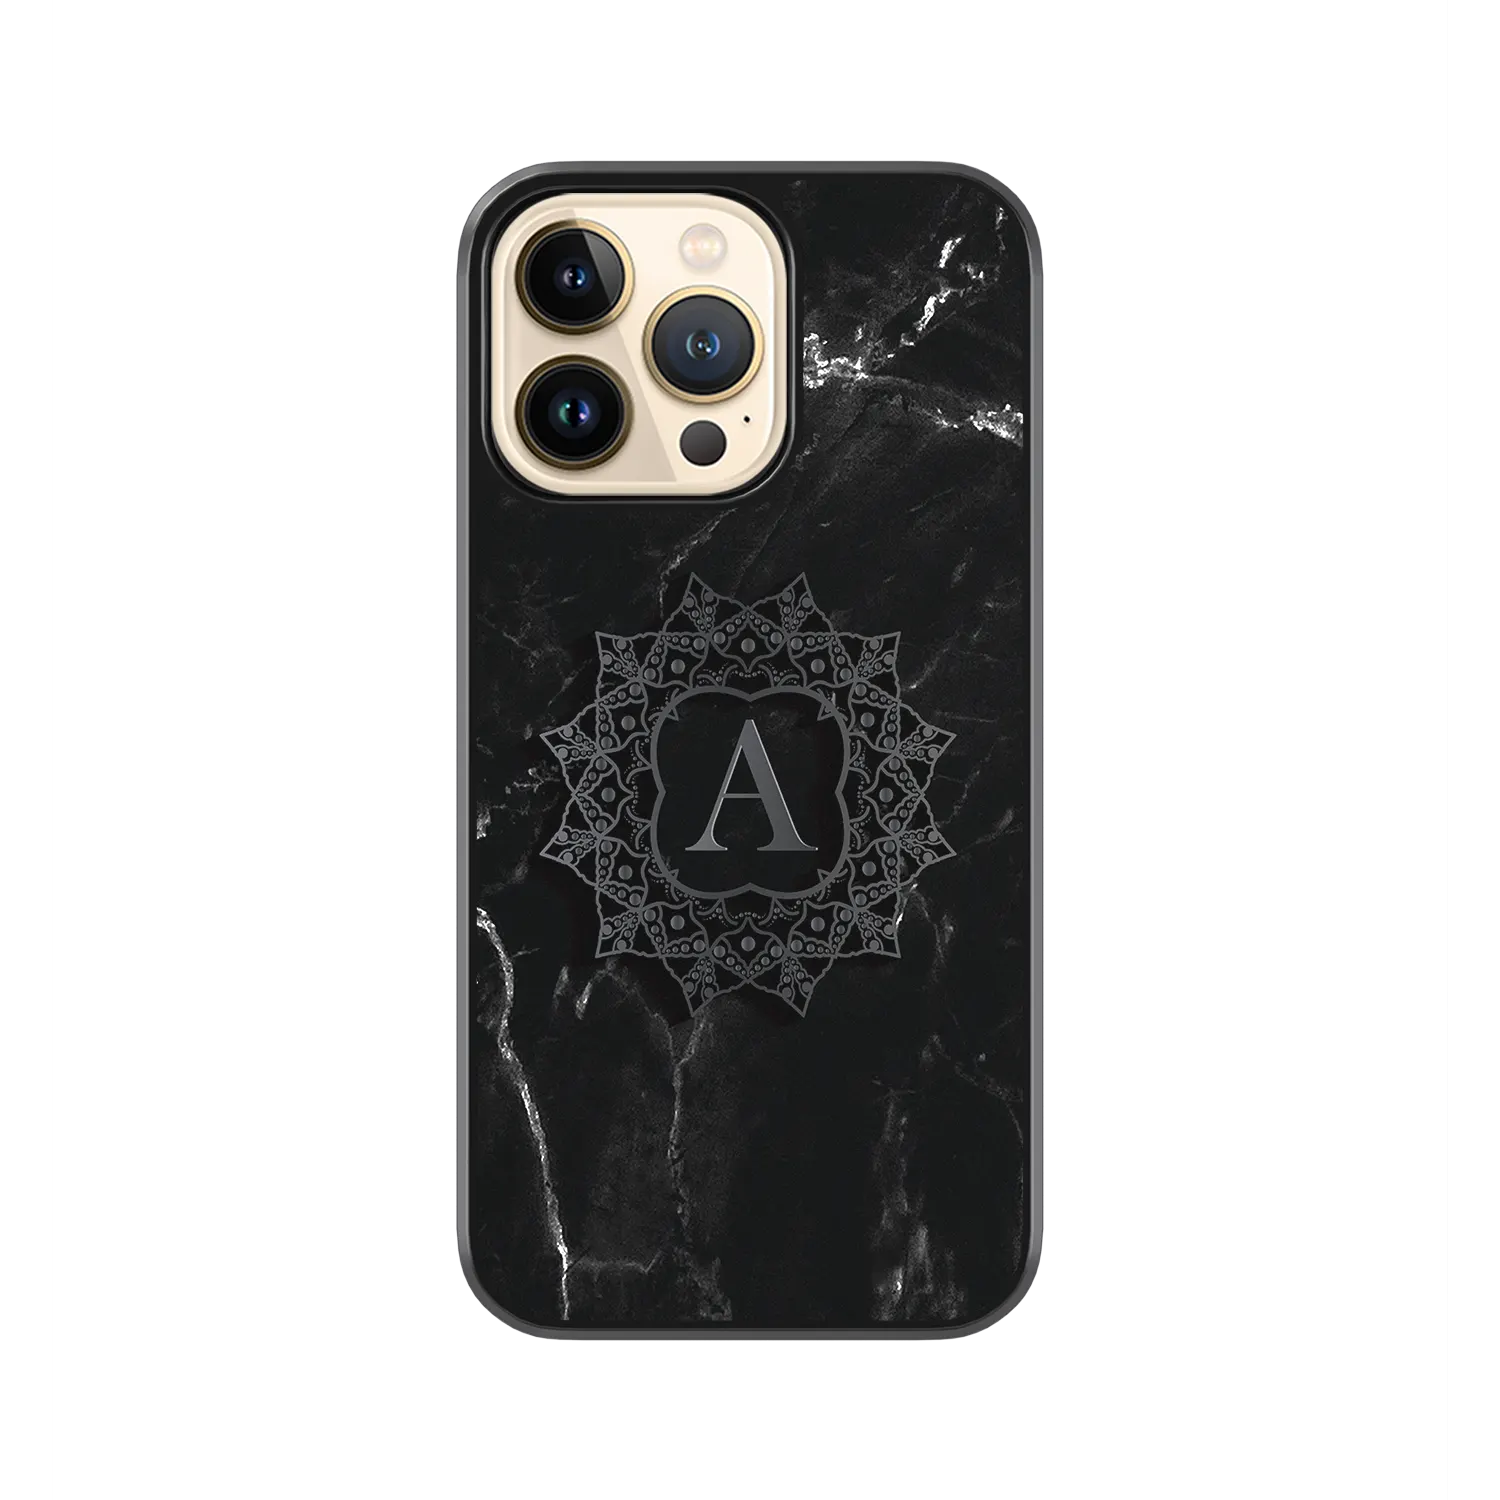 Achlys iphone 13 pro max cover